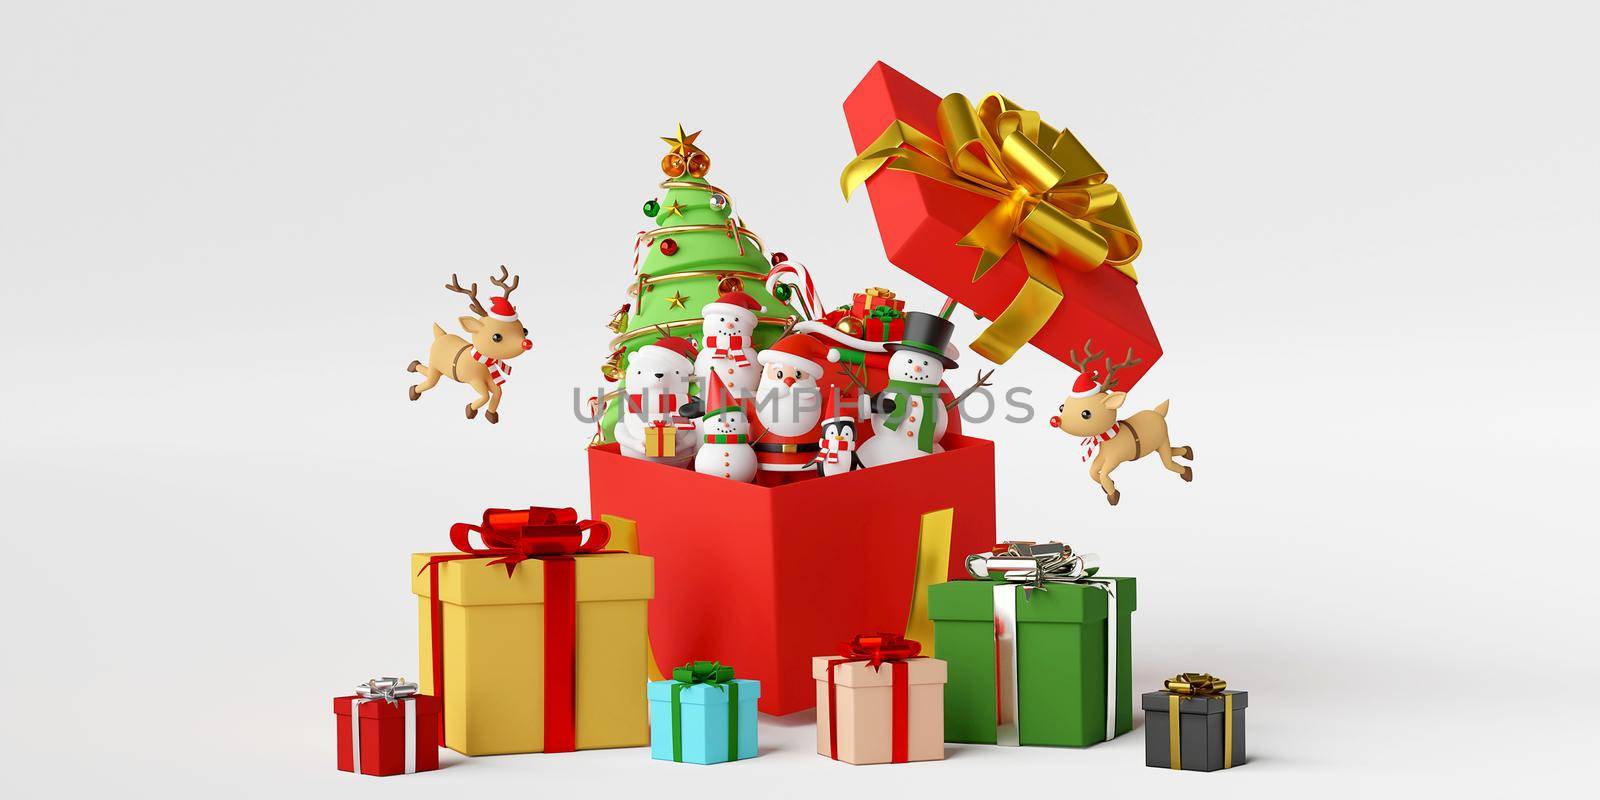 Merry Christmas and Happy New Year, Scene of Christmas celebration with Santa Claus and friends with big gift box, 3d rendering by nutzchotwarut